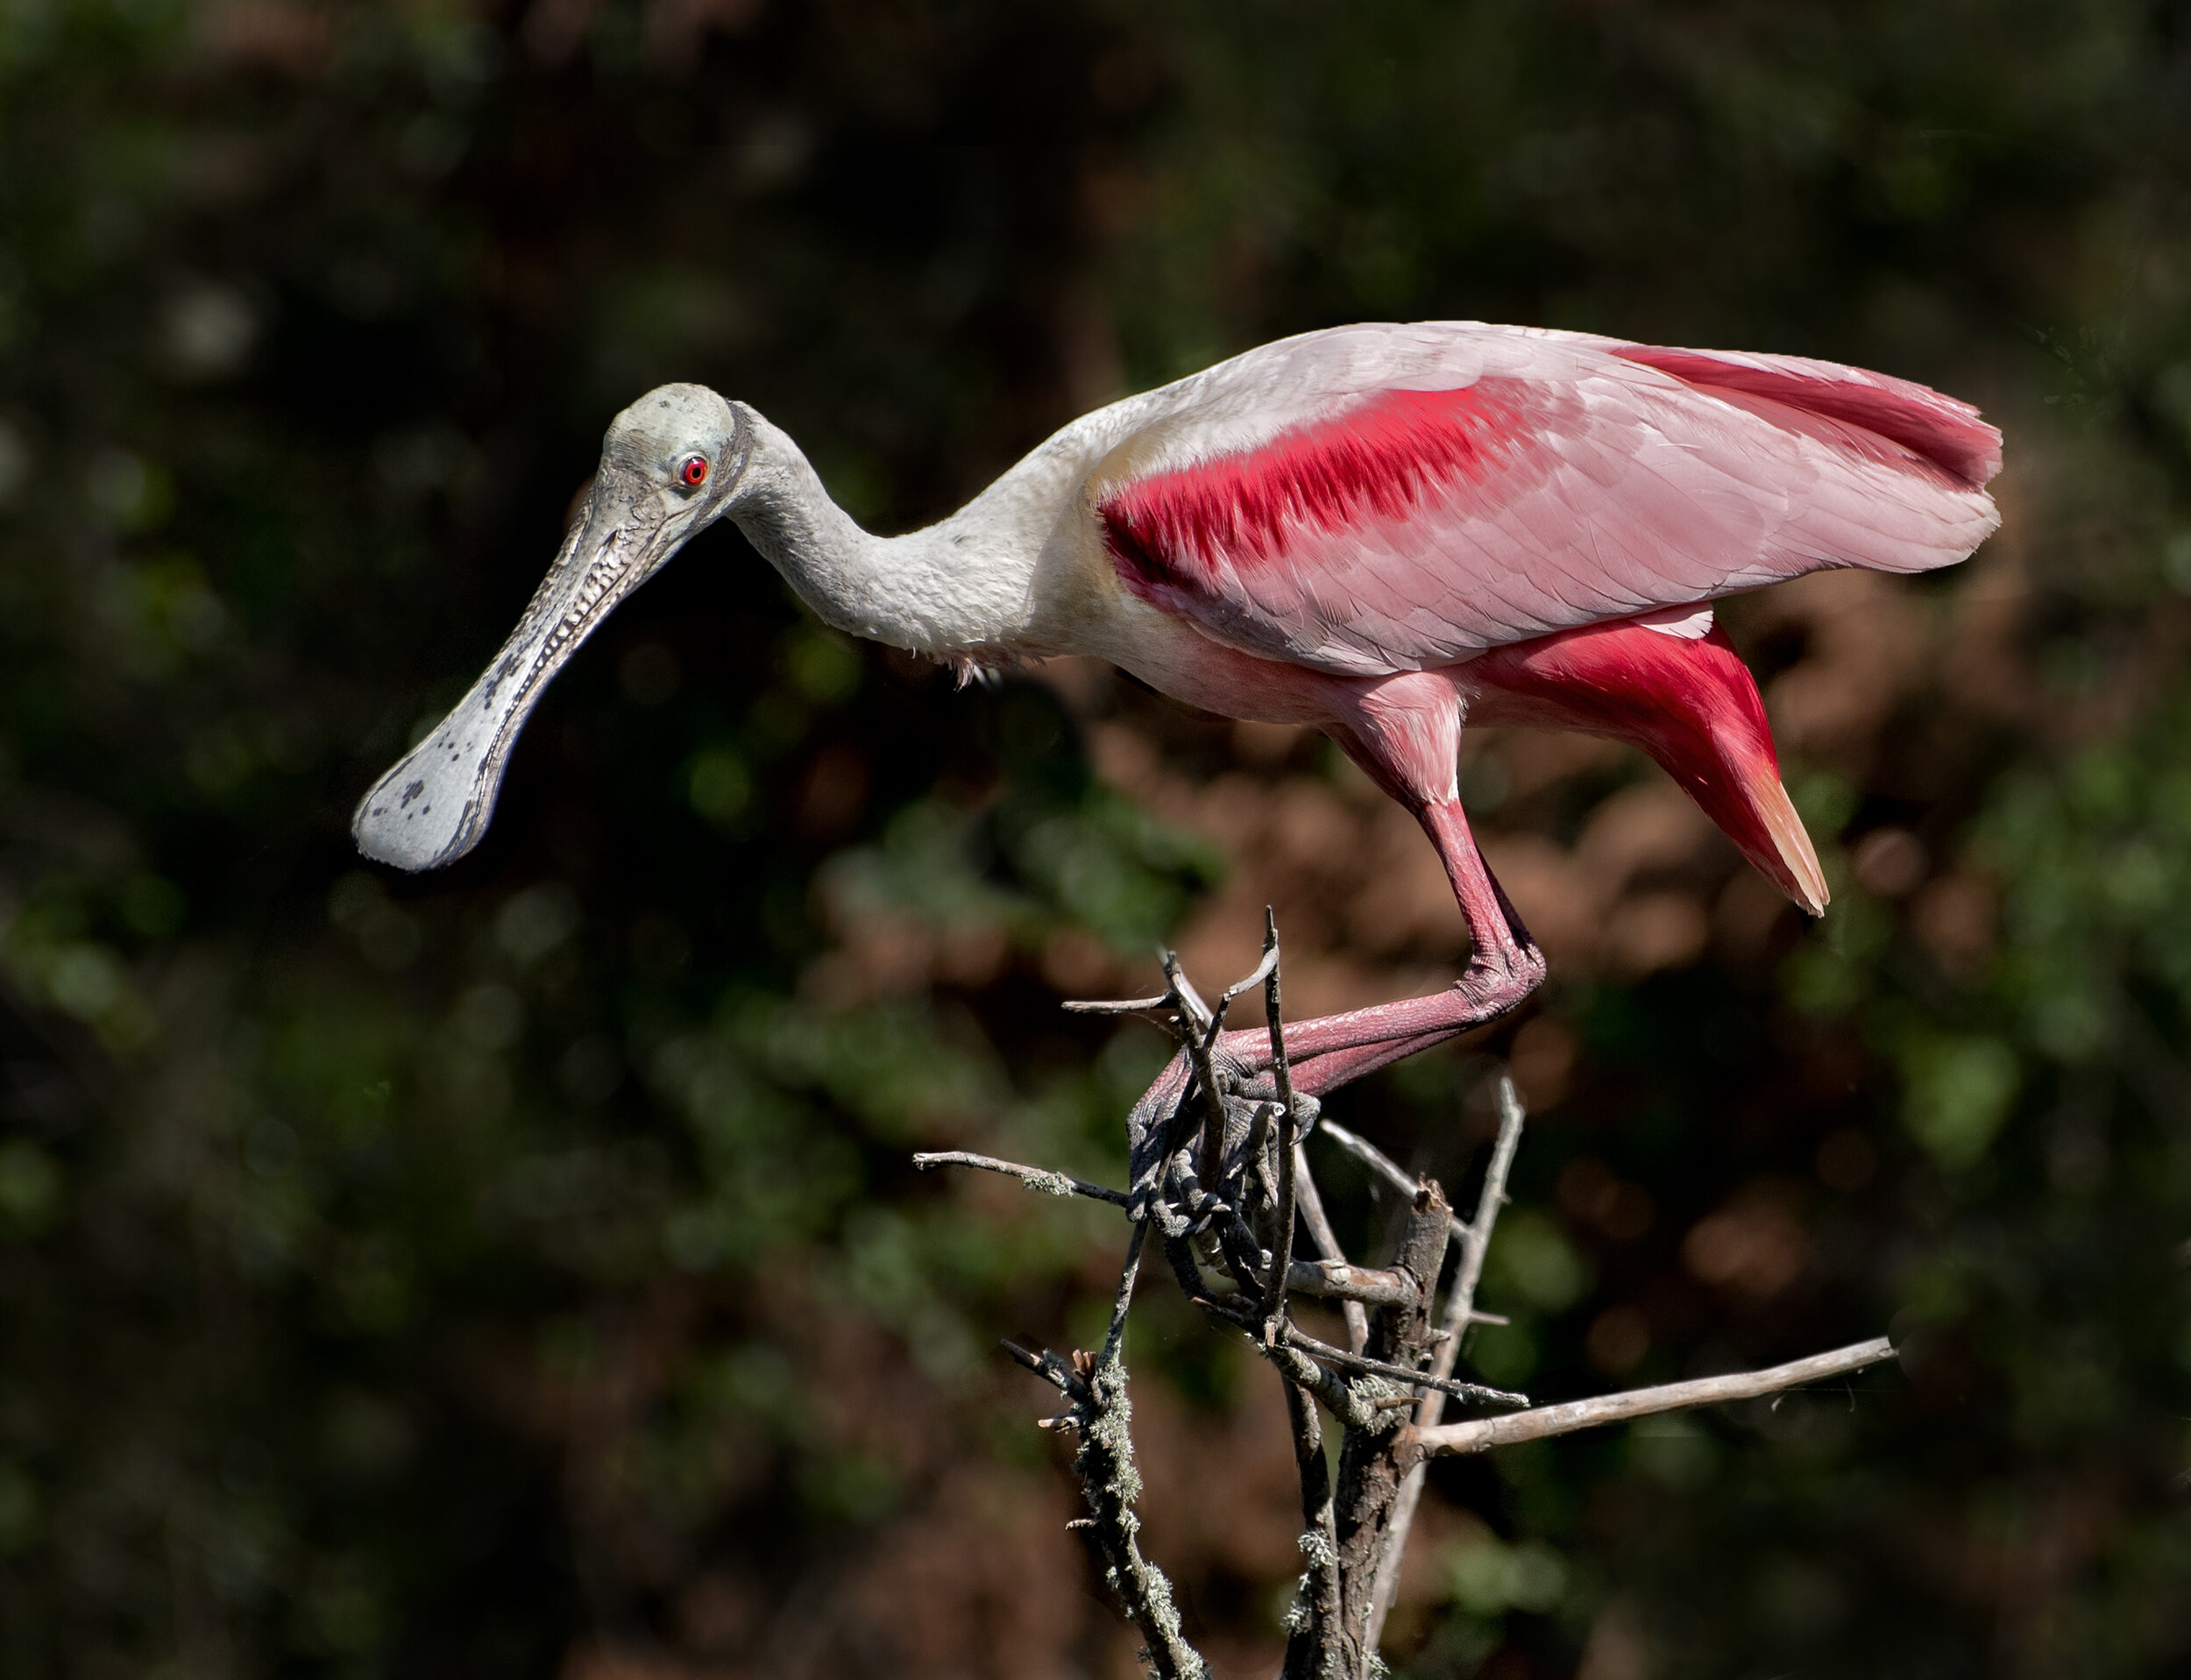 Spoonbill. Photograph © 2021 Jerry Biddlecom. All Rights Reserved.